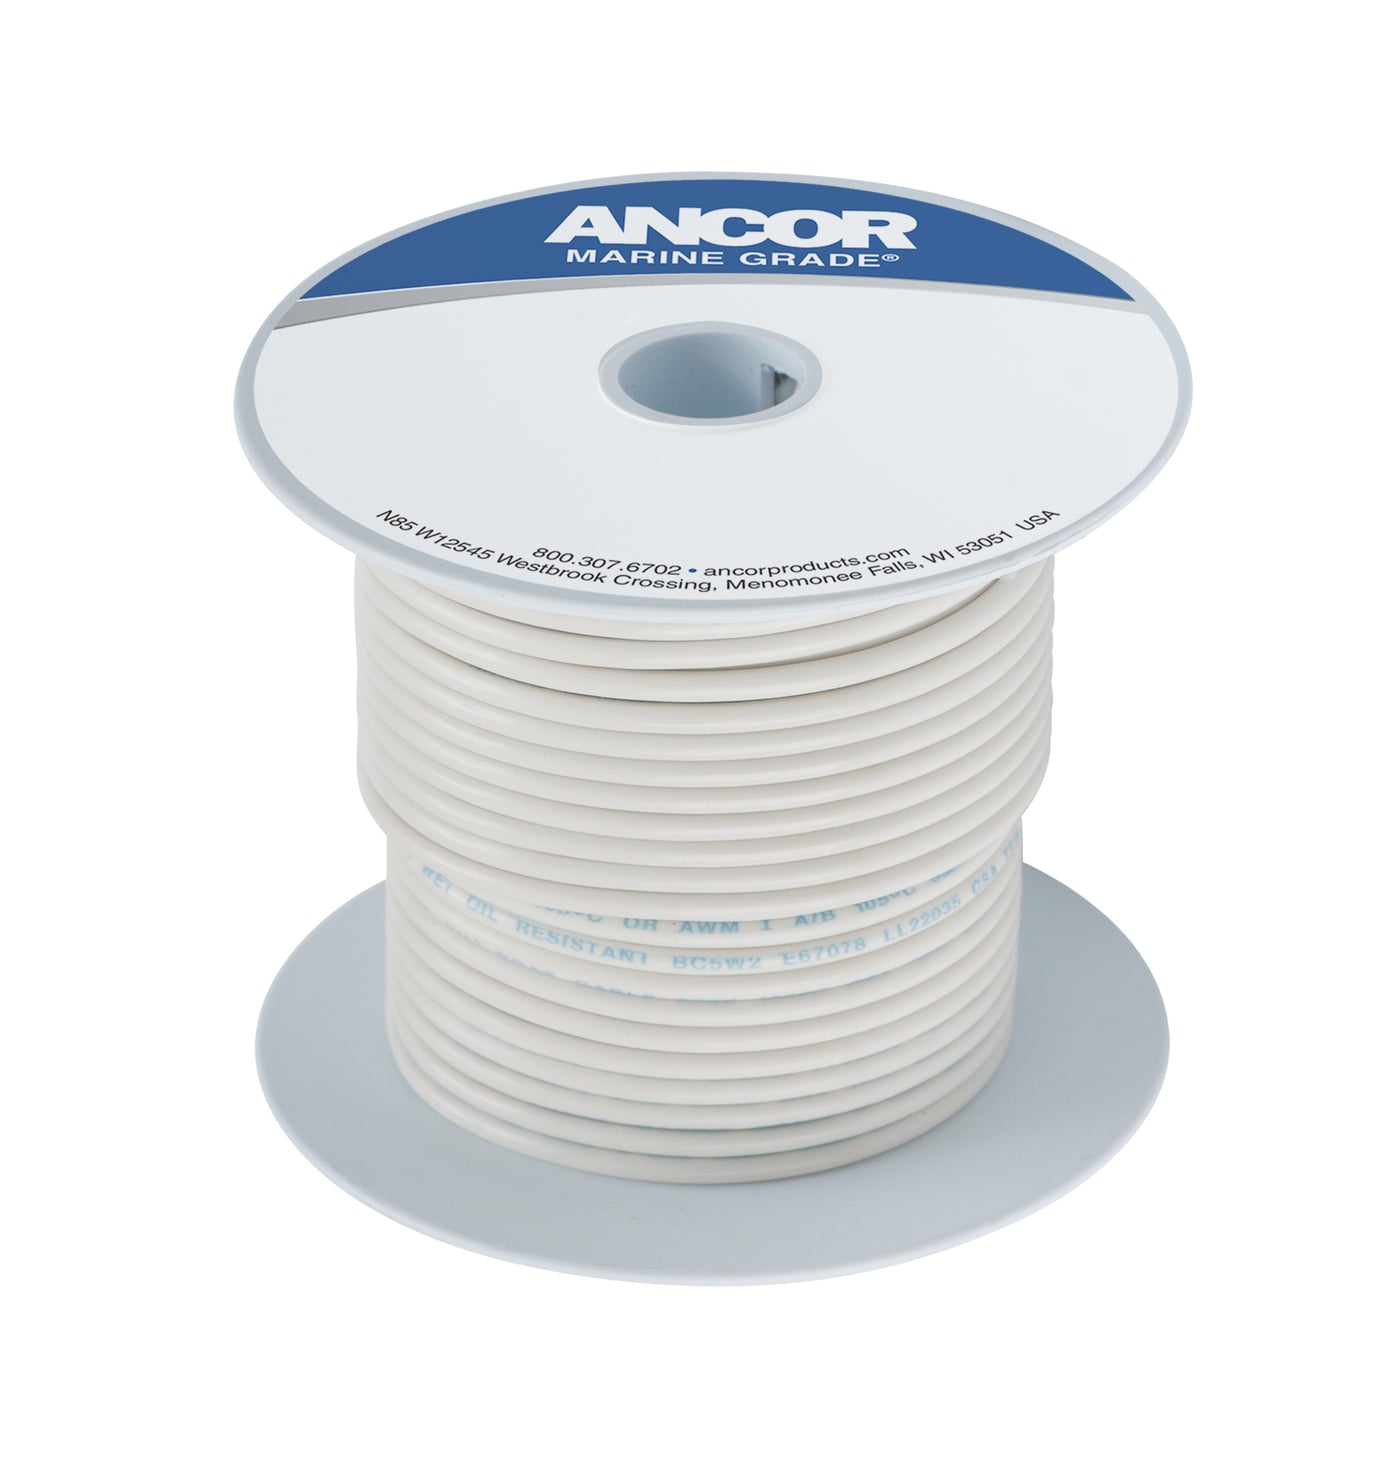 Ancor 112702 Tinned Copper Wire, 6 AWG (13mm²), White - 25ft